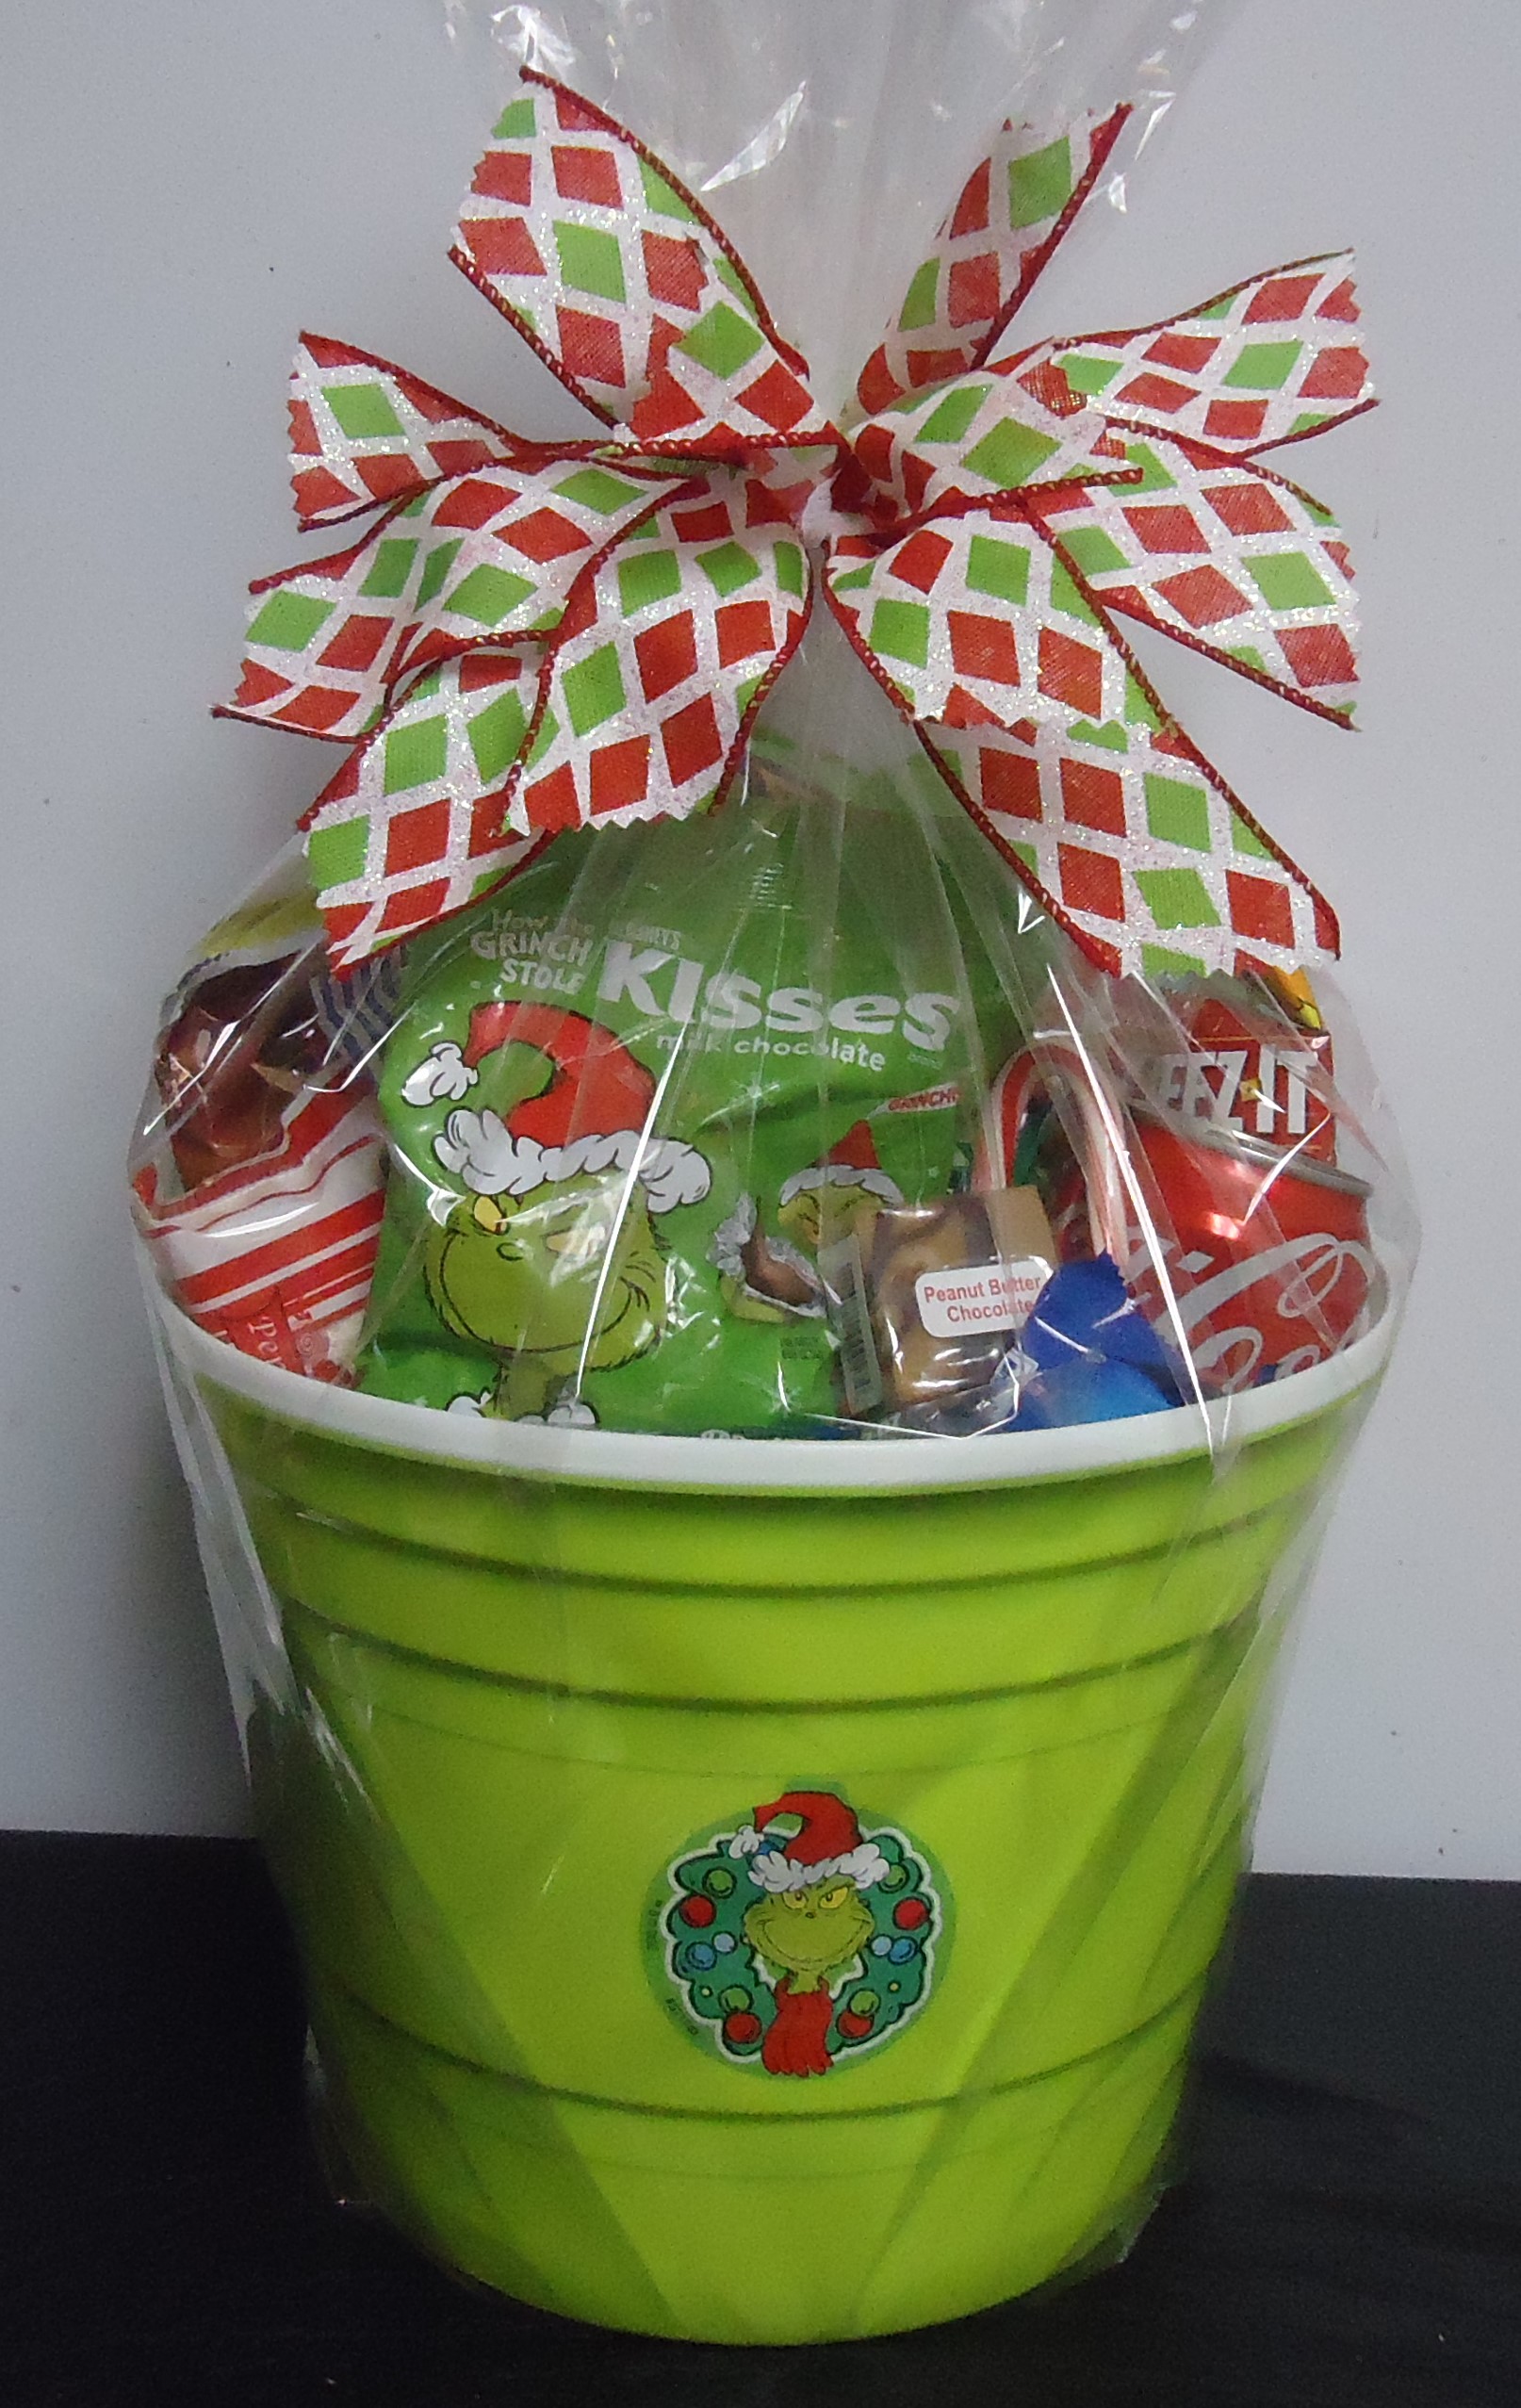 (5) "Grinch" Goodie Tub
$50.00
(Also can do Max or Cindy Lou)